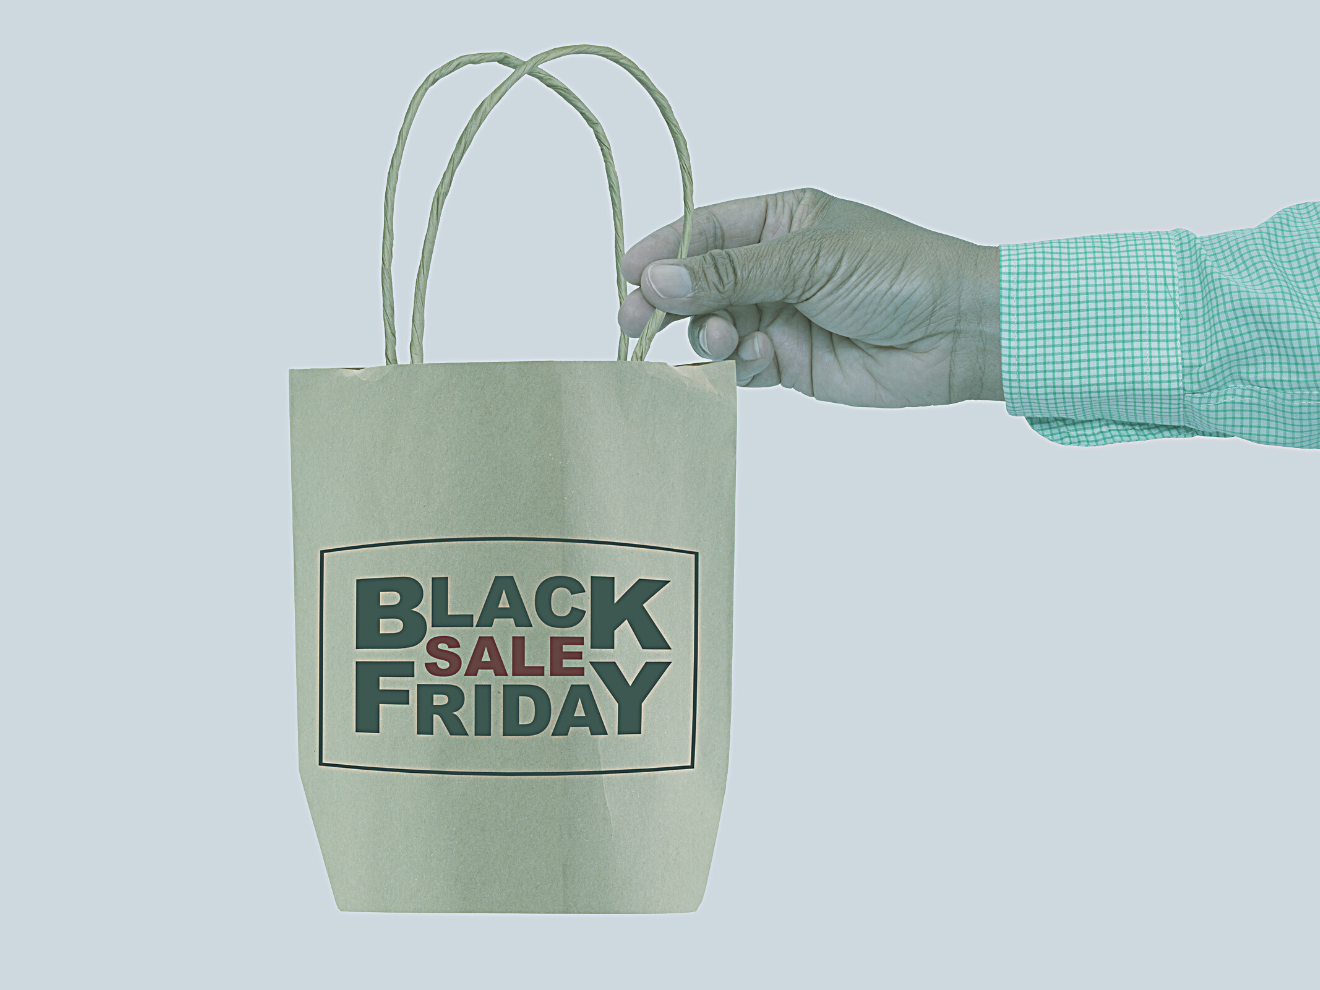 Black Friday 2022: The 5-Point Checklist to Prepare Your Shopify Store